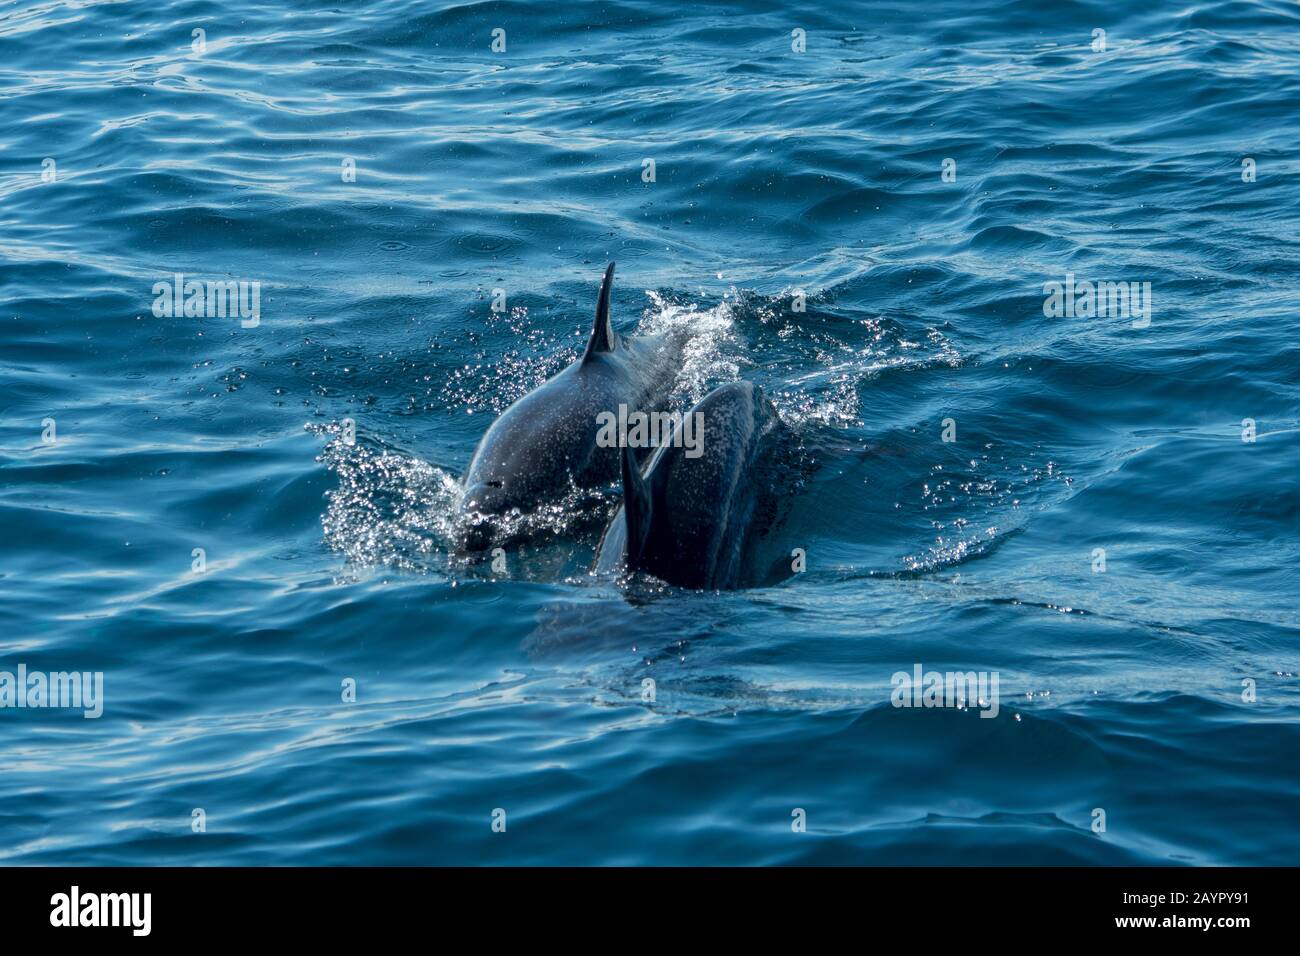 Two pantropical spotted dolphin (Stenella attenuata) porpoising in the Pacific Ocean off the coast of Panama. Stock Photo